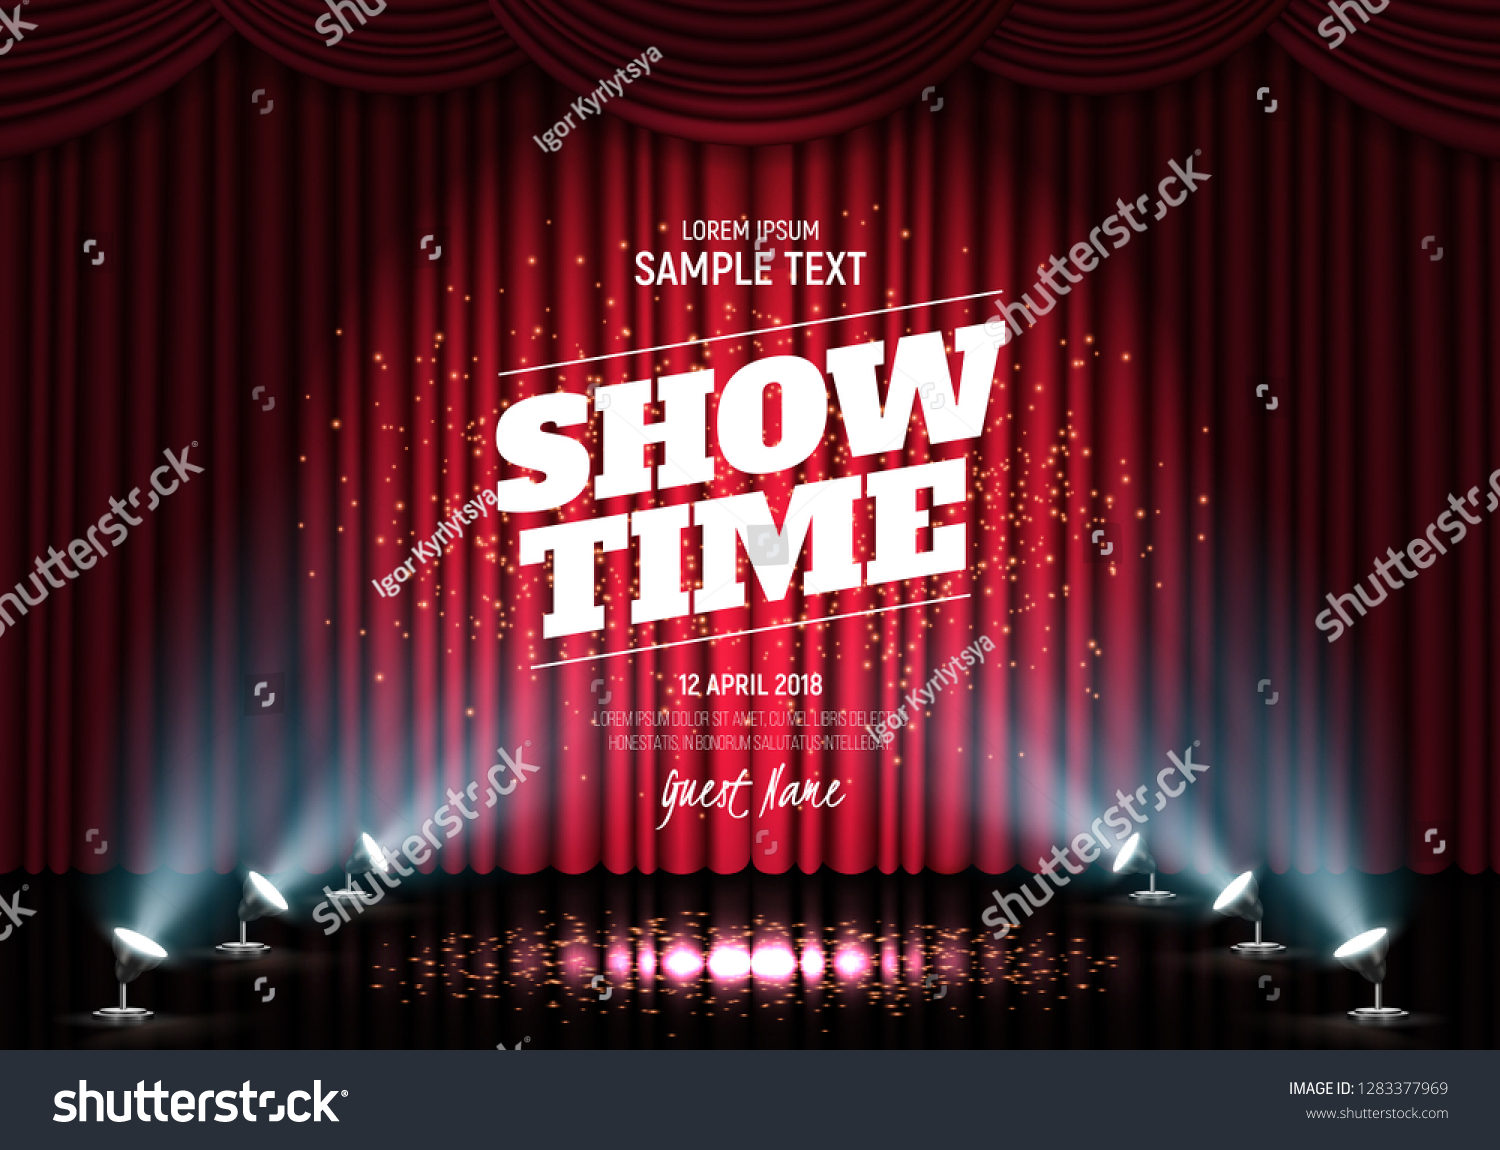 SVG of Showtime banner with curtain illuminated by spotlights. Vector illustration. svg